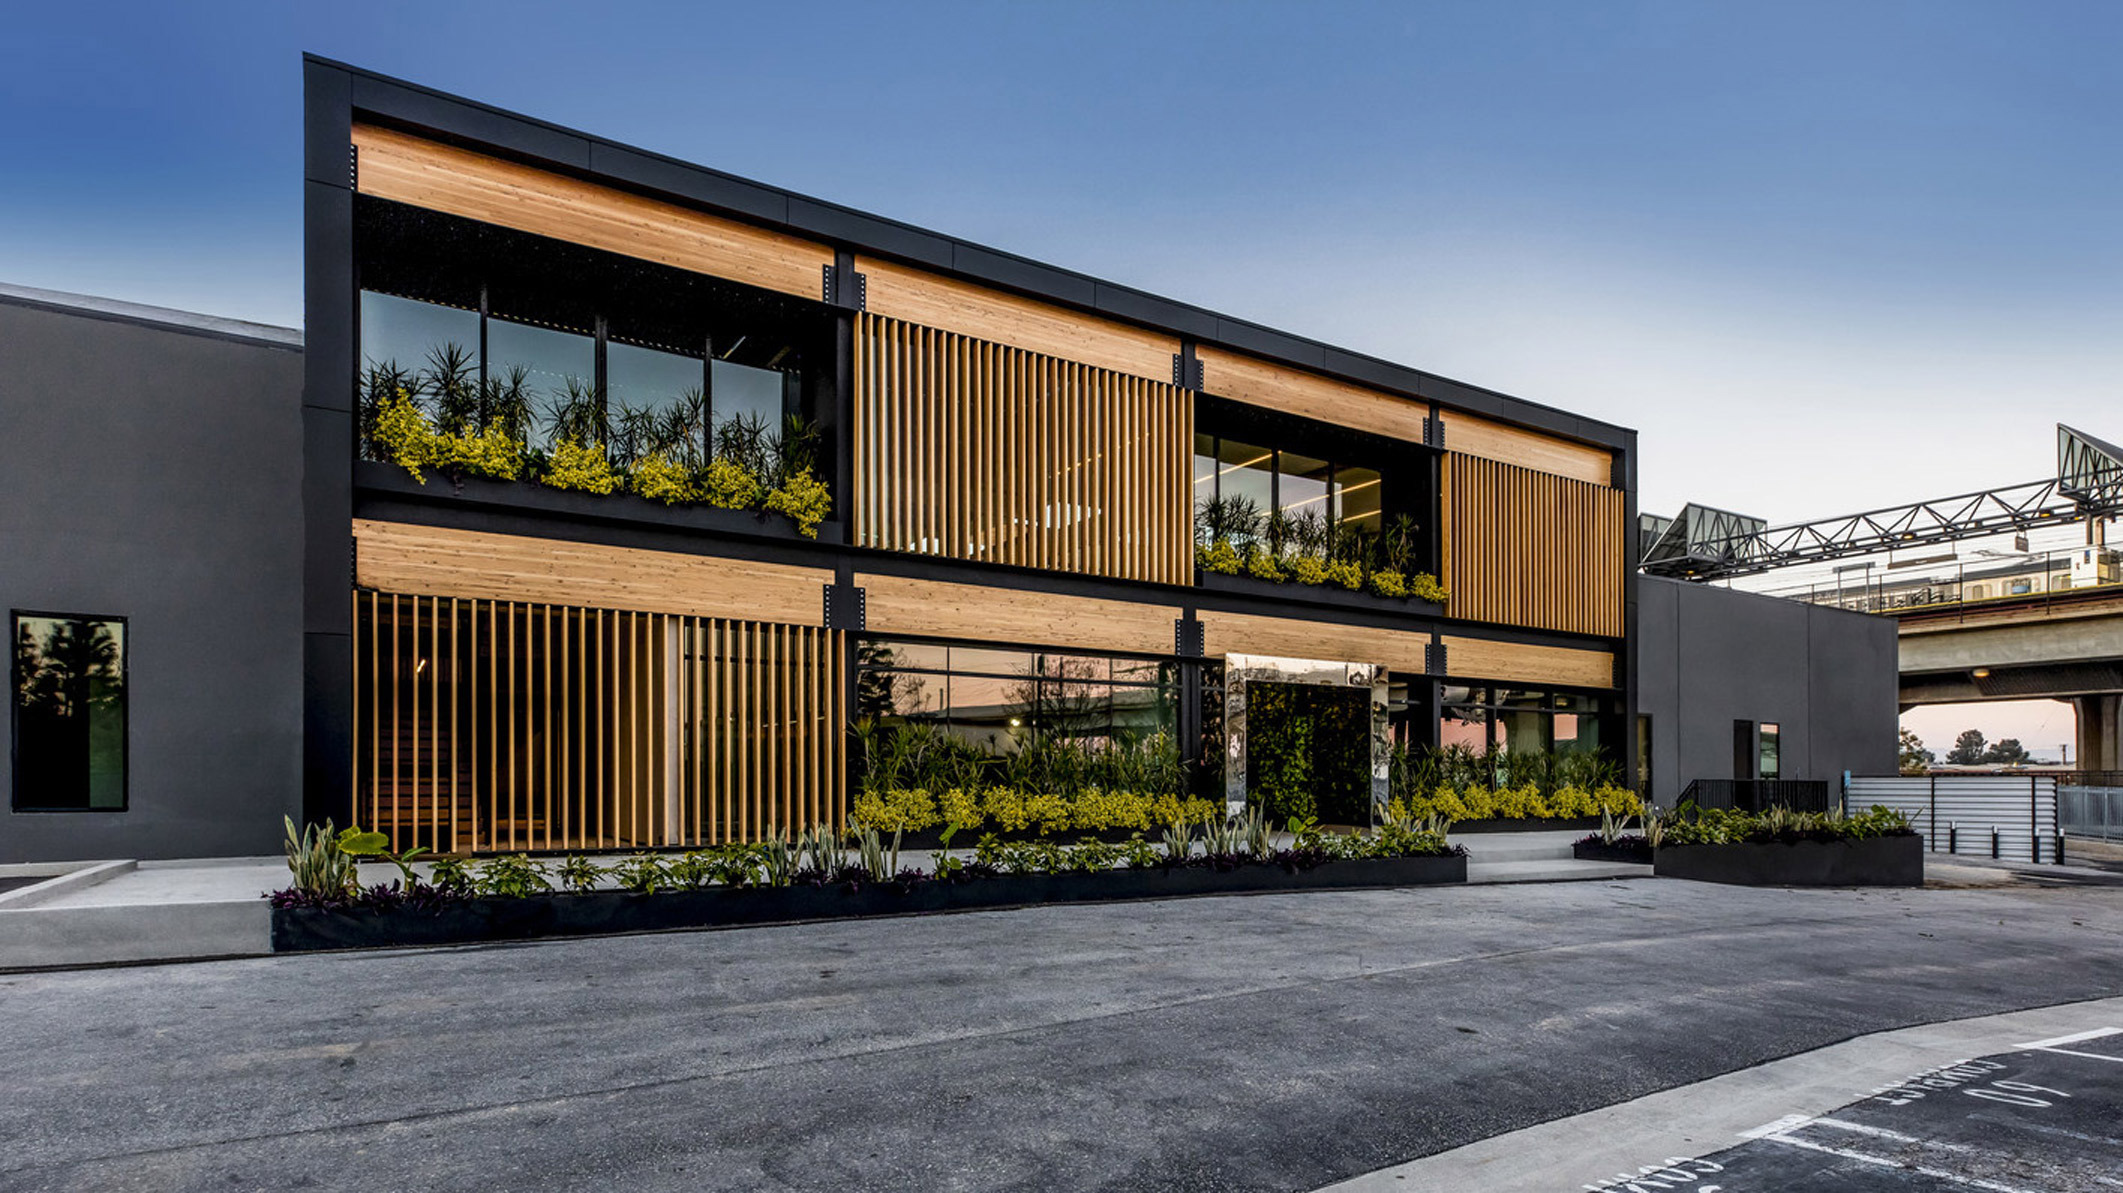 Modern commercial building exterior featuring sleek horizontal lines, wooden slat accents, and an integrated green space with planters on the upper level, captured during twilight hours.